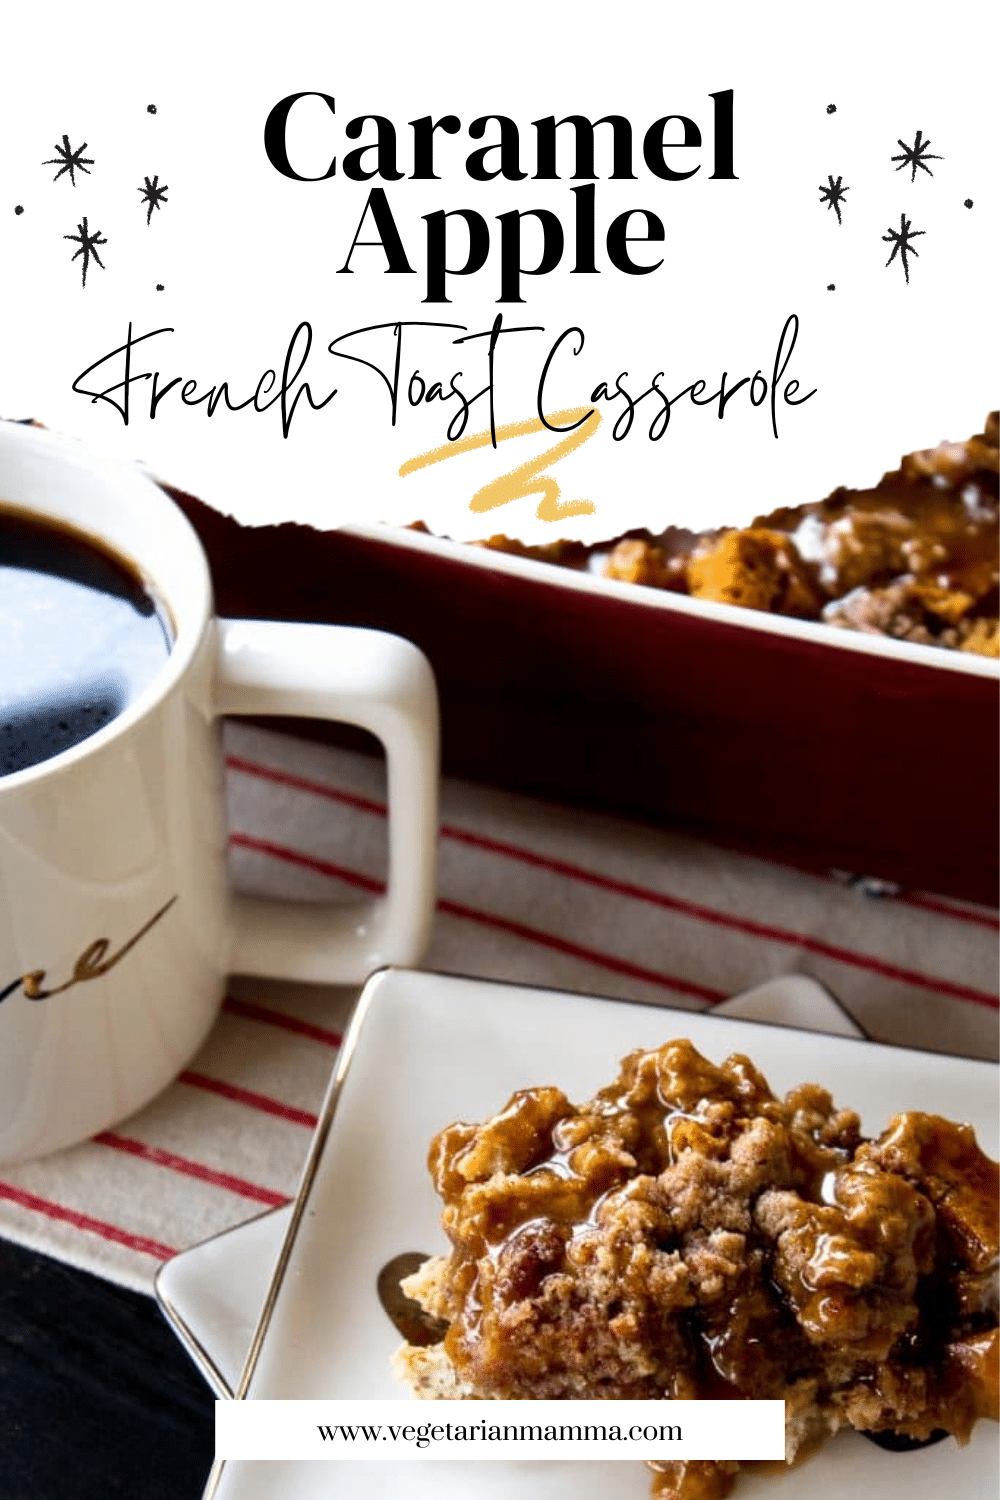 Lazy weekend mornings are meant for delicious brunches. Try this delicious caramel apple french toast casserole this weekend!